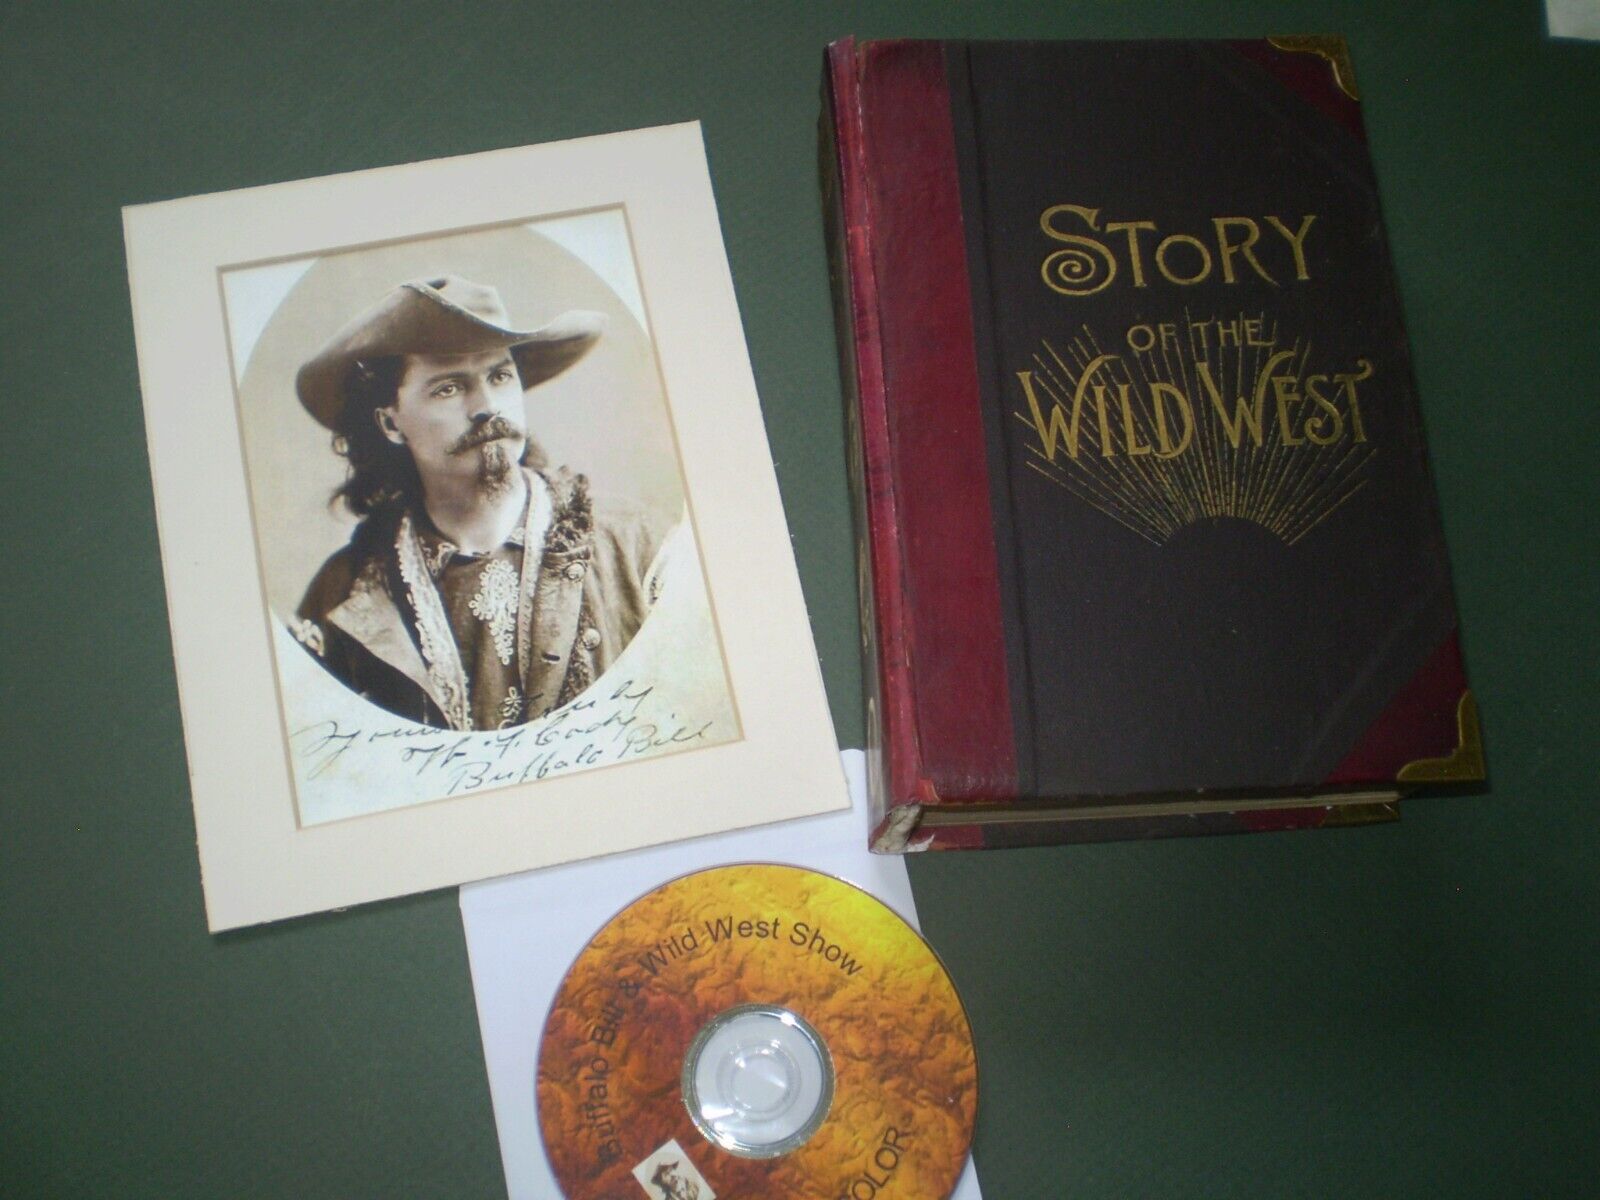 The Story of the Wild West - Buffalo Bill Book  1888 & Wild West DVD